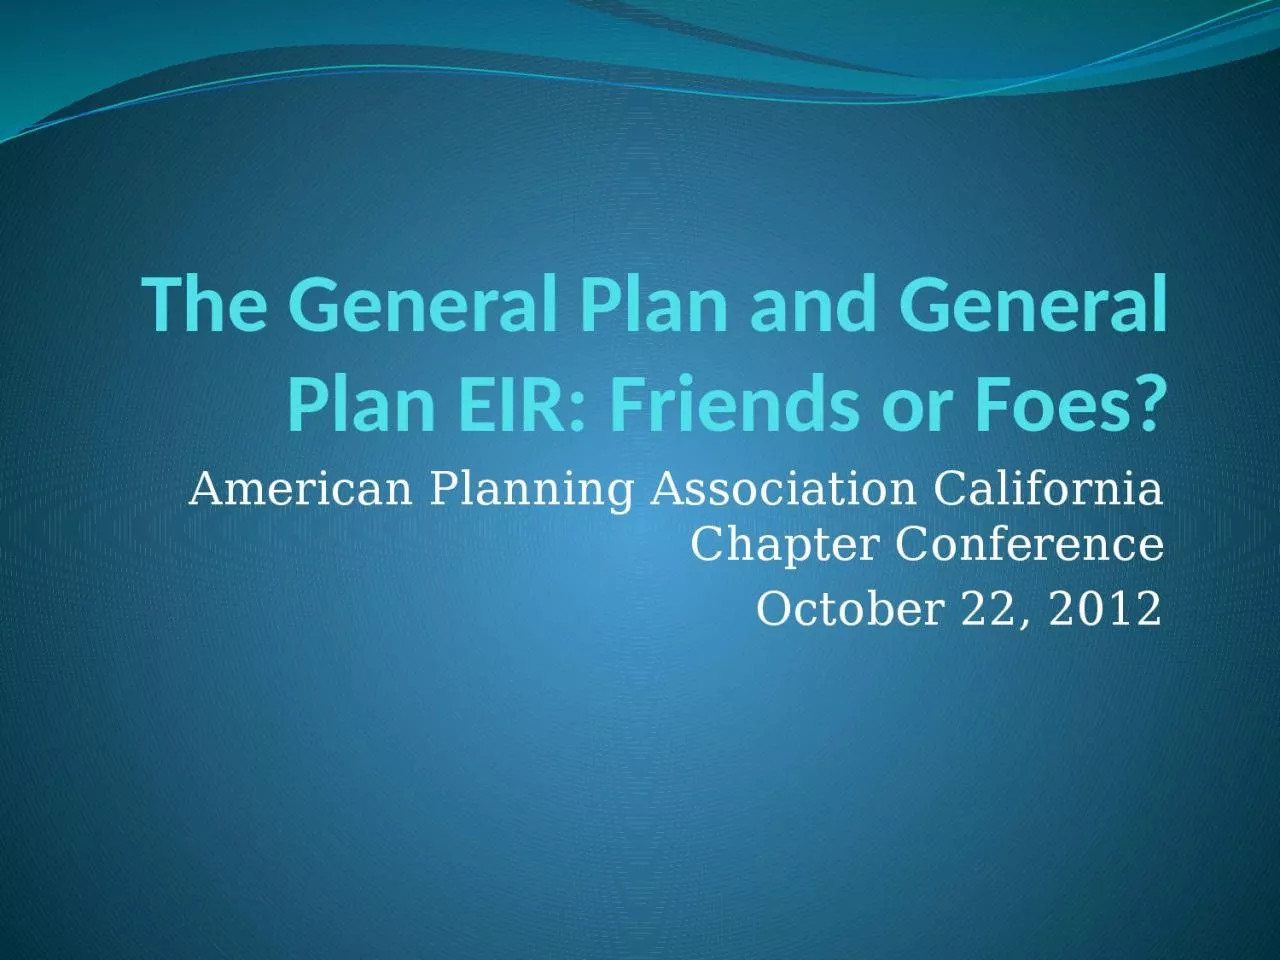 The General Plan and General Plan EIR: Friends or Foes?